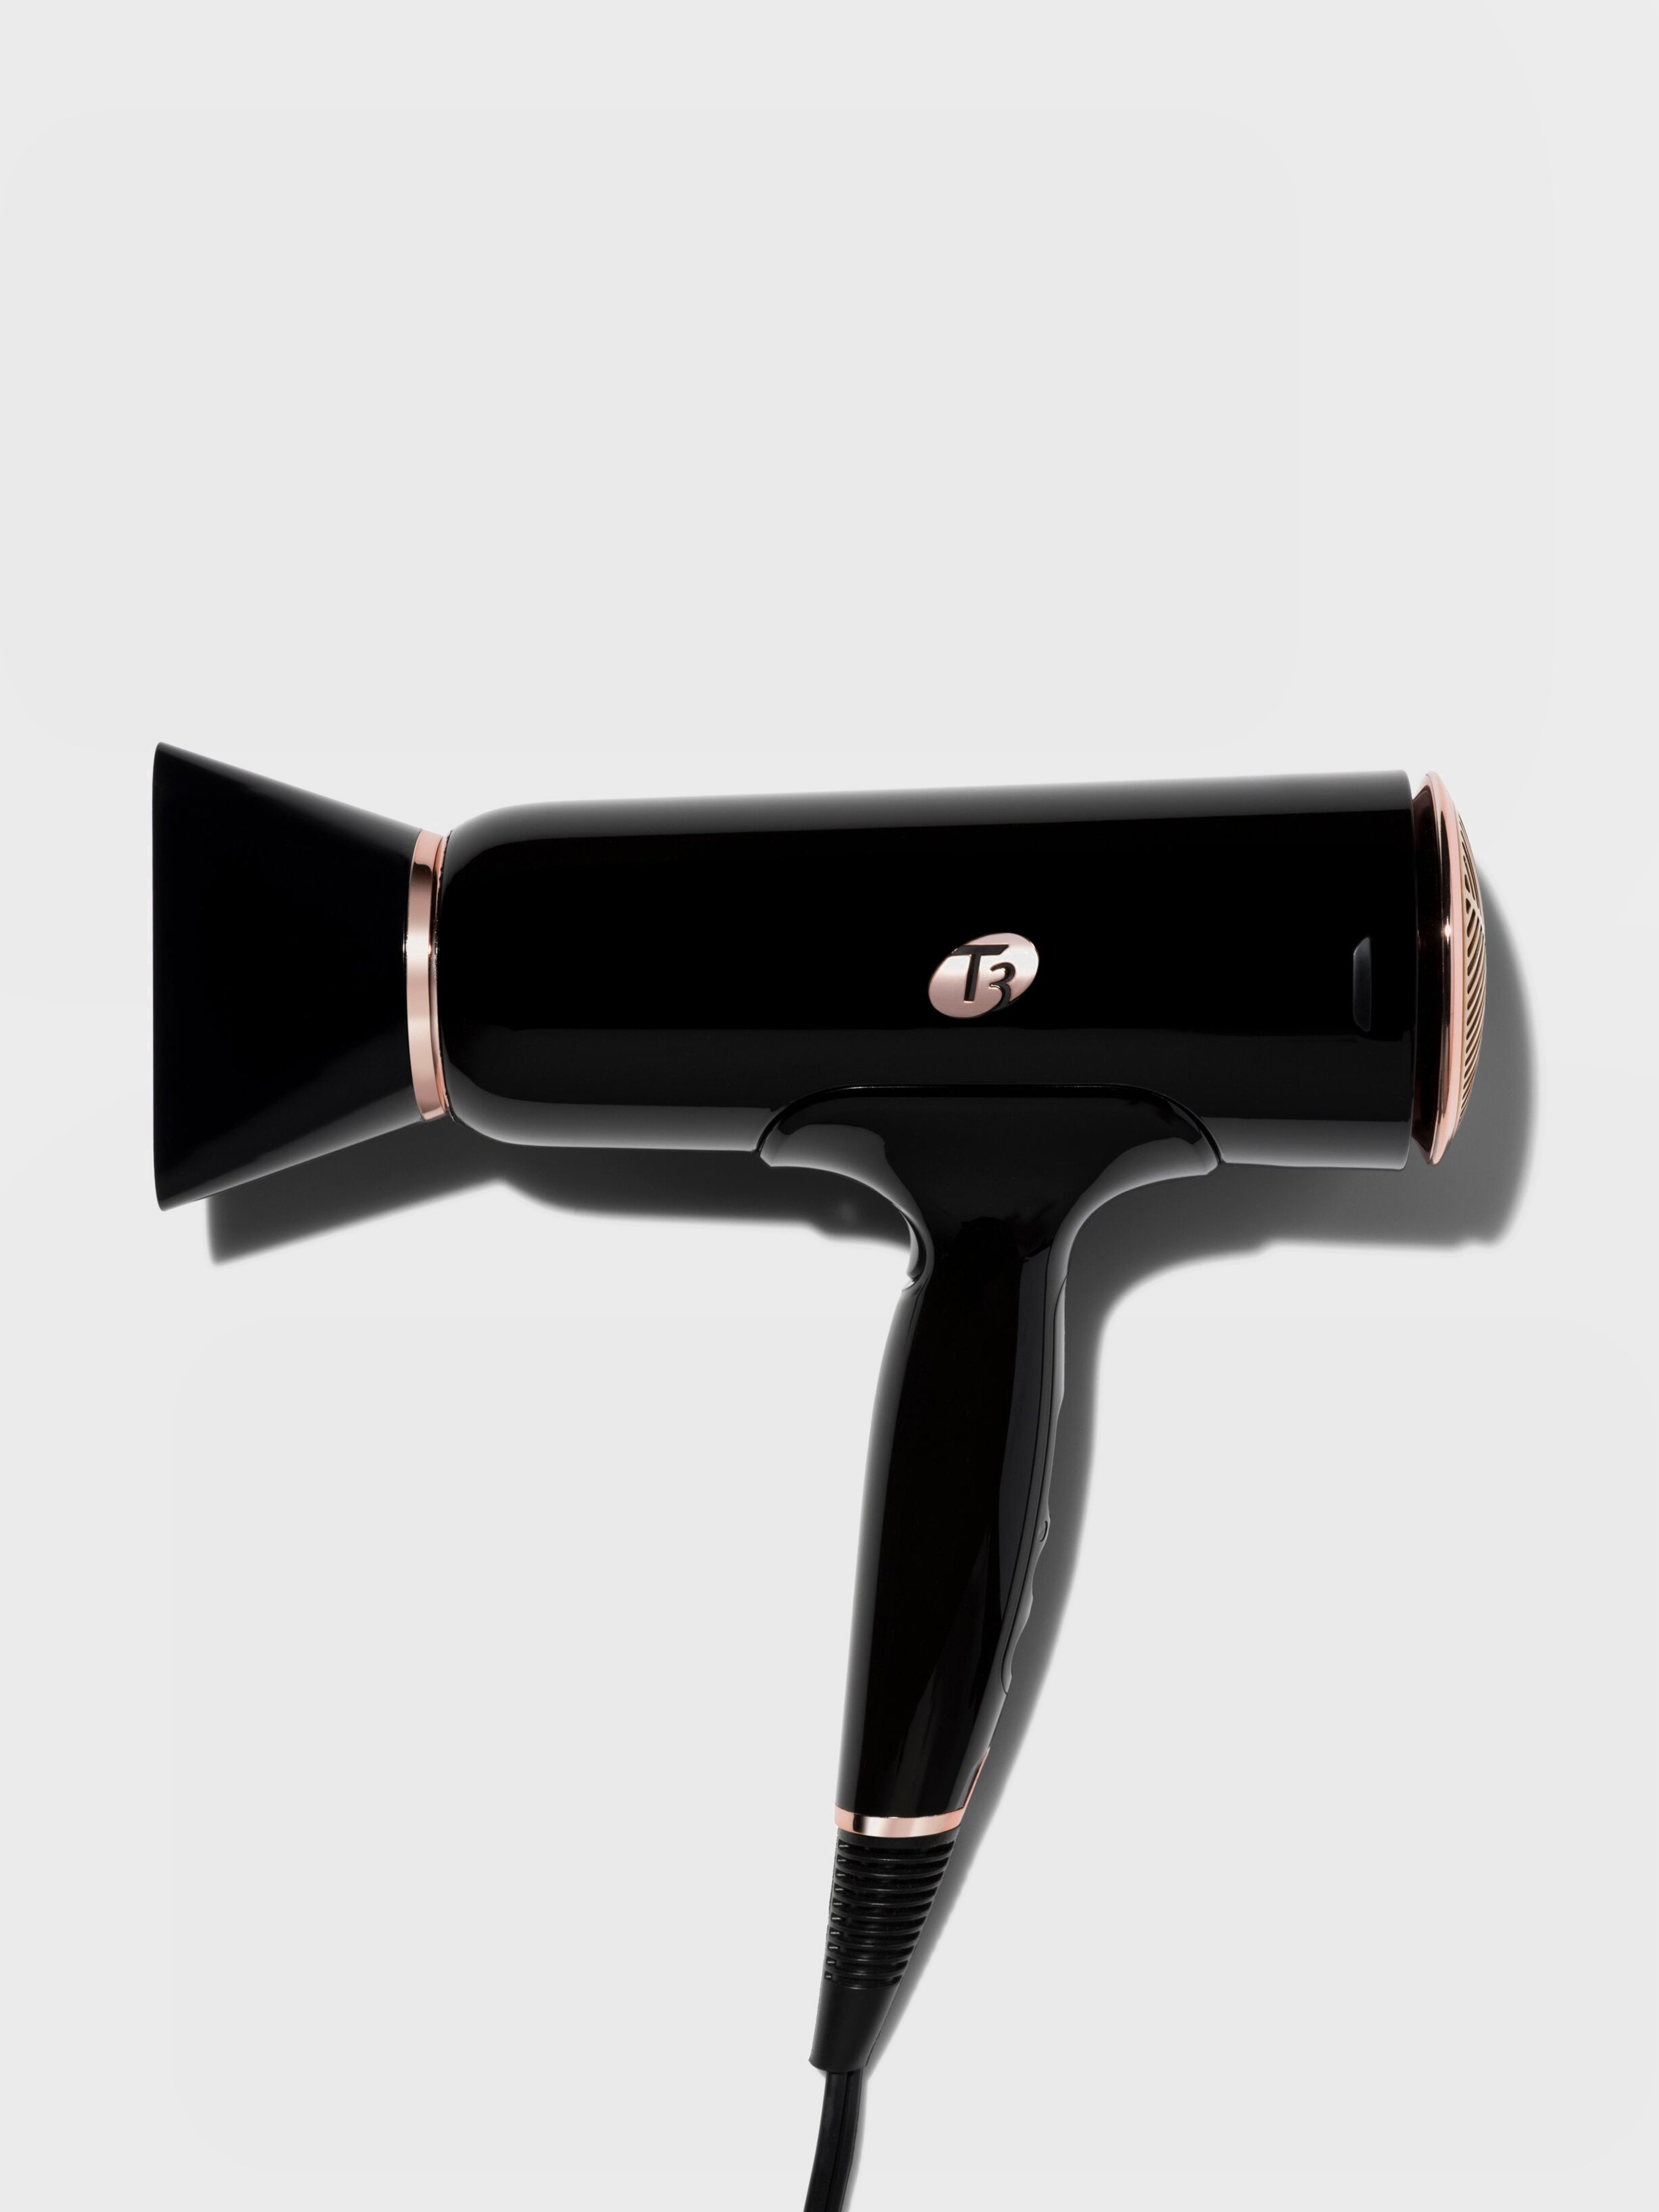 T3 T3 CURA LUXE PROFESSIONAL IONIC HAIR DRYER WITH AUTO PAUSE SENSOR